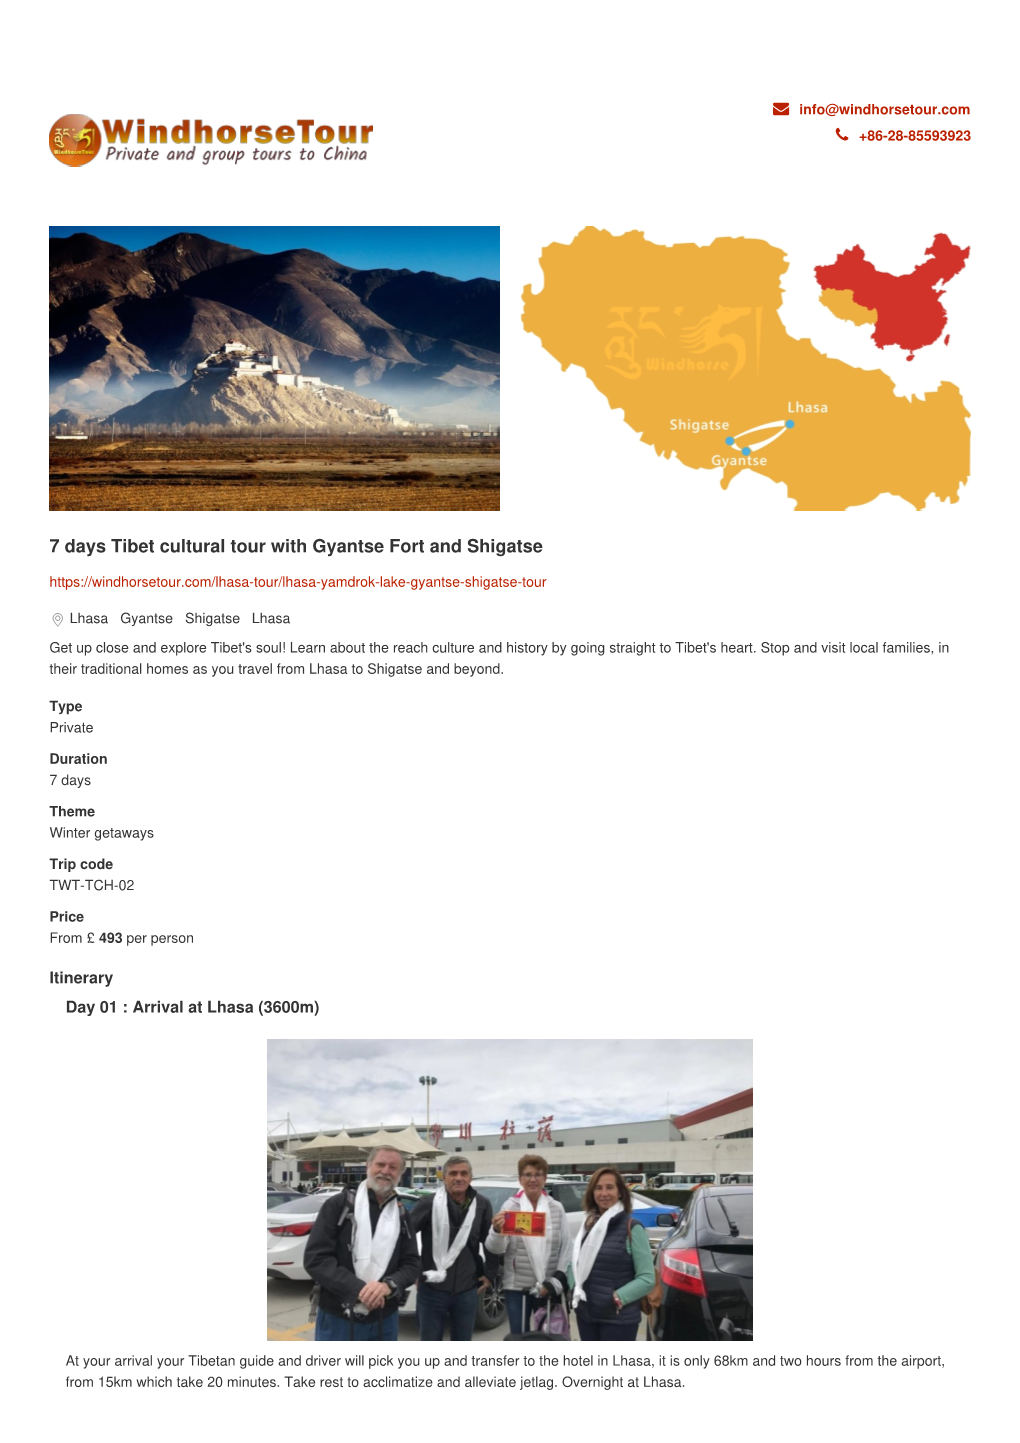 7 Days Tibet Cultural Tour with Gyantse Fort and Shigatse